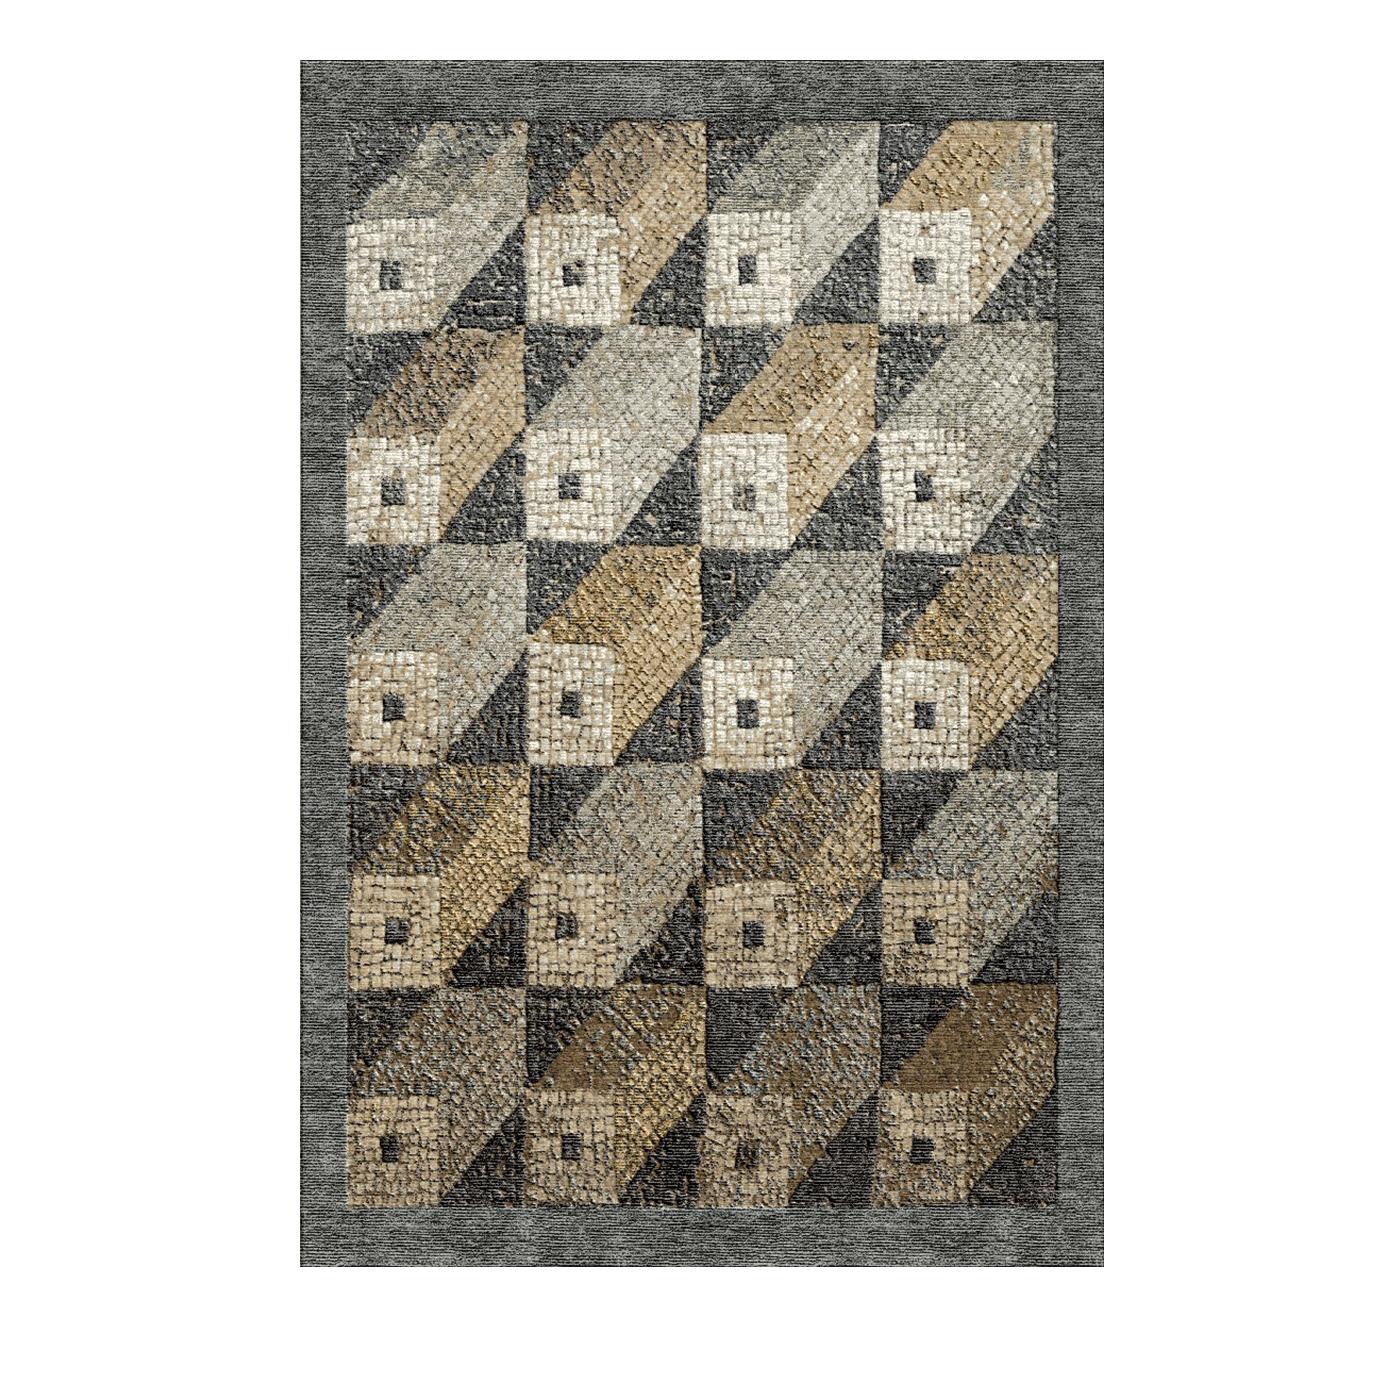 Evoking the textured and rustic character of Ancient Roman tile mosaics, this remarkable rug was masterfully fashioned of wool and bamboo by Tibetan rug-makers specialized in hand-knotting. Elongated, three-dimensional stone blocks are colored in